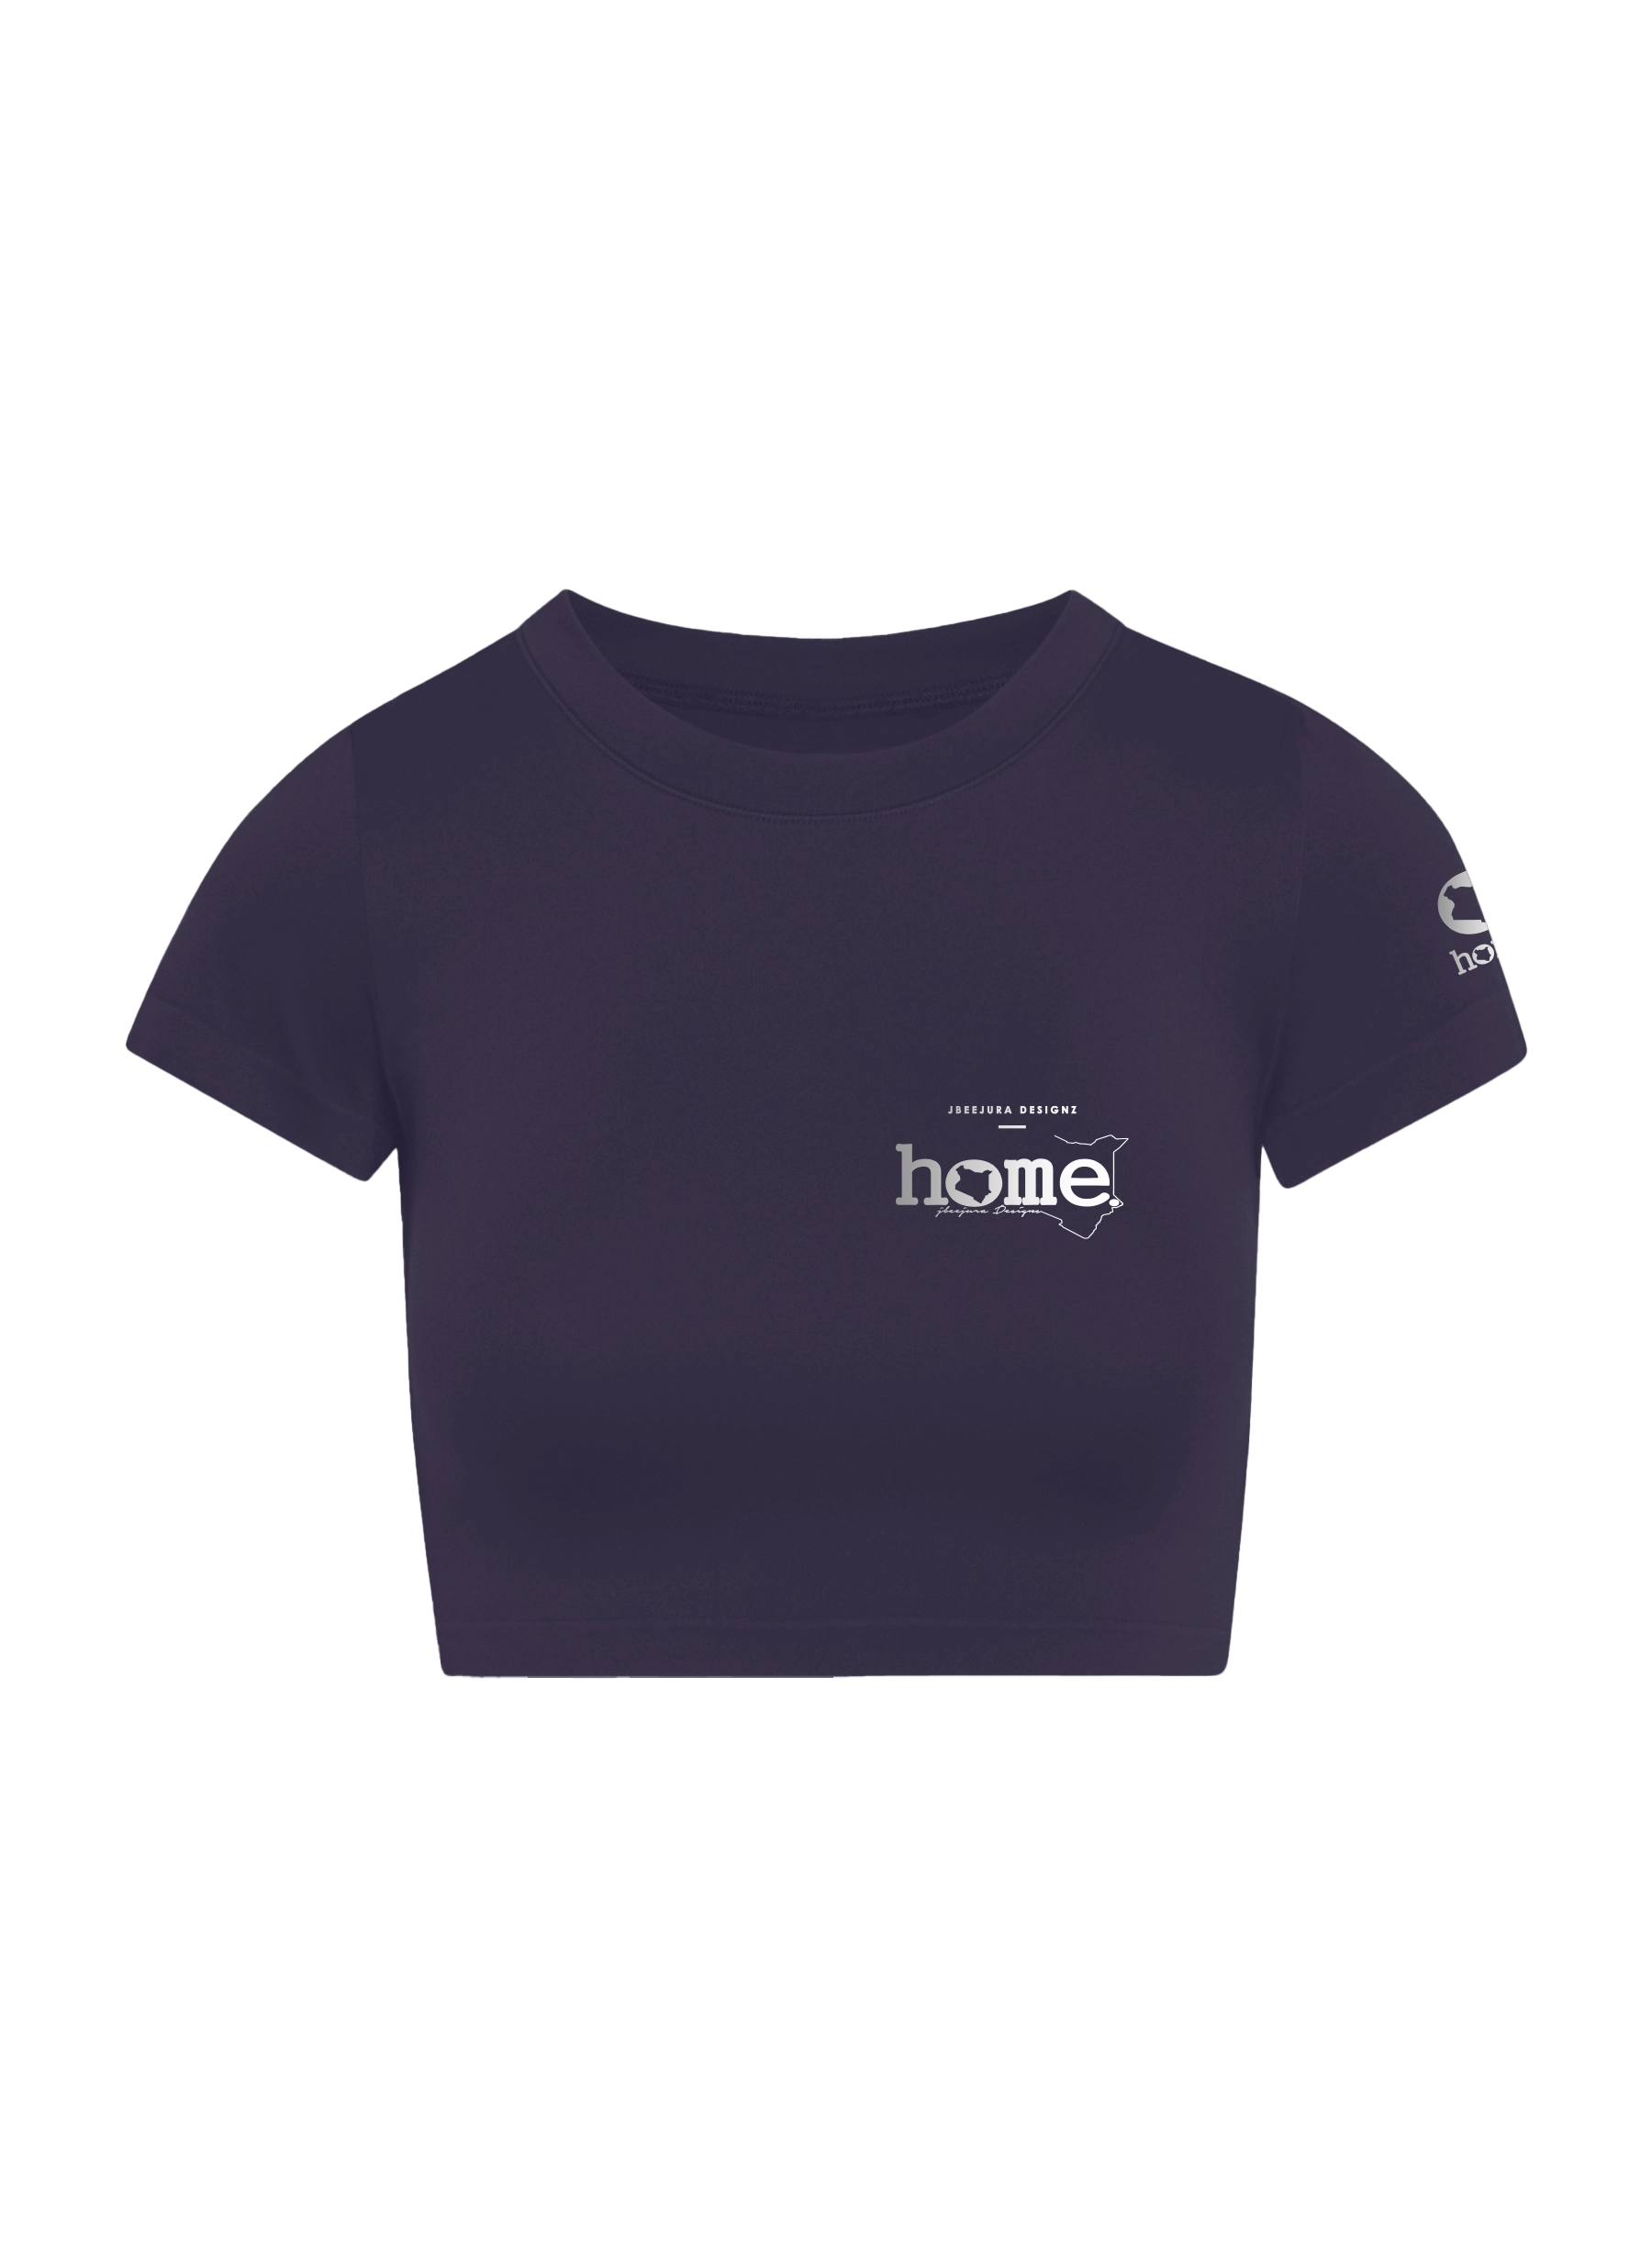 home_254 SHORT SLEEVED  RICH PURPLE ARIA TEE WITH A SILVER 3D WORDS PRINT 